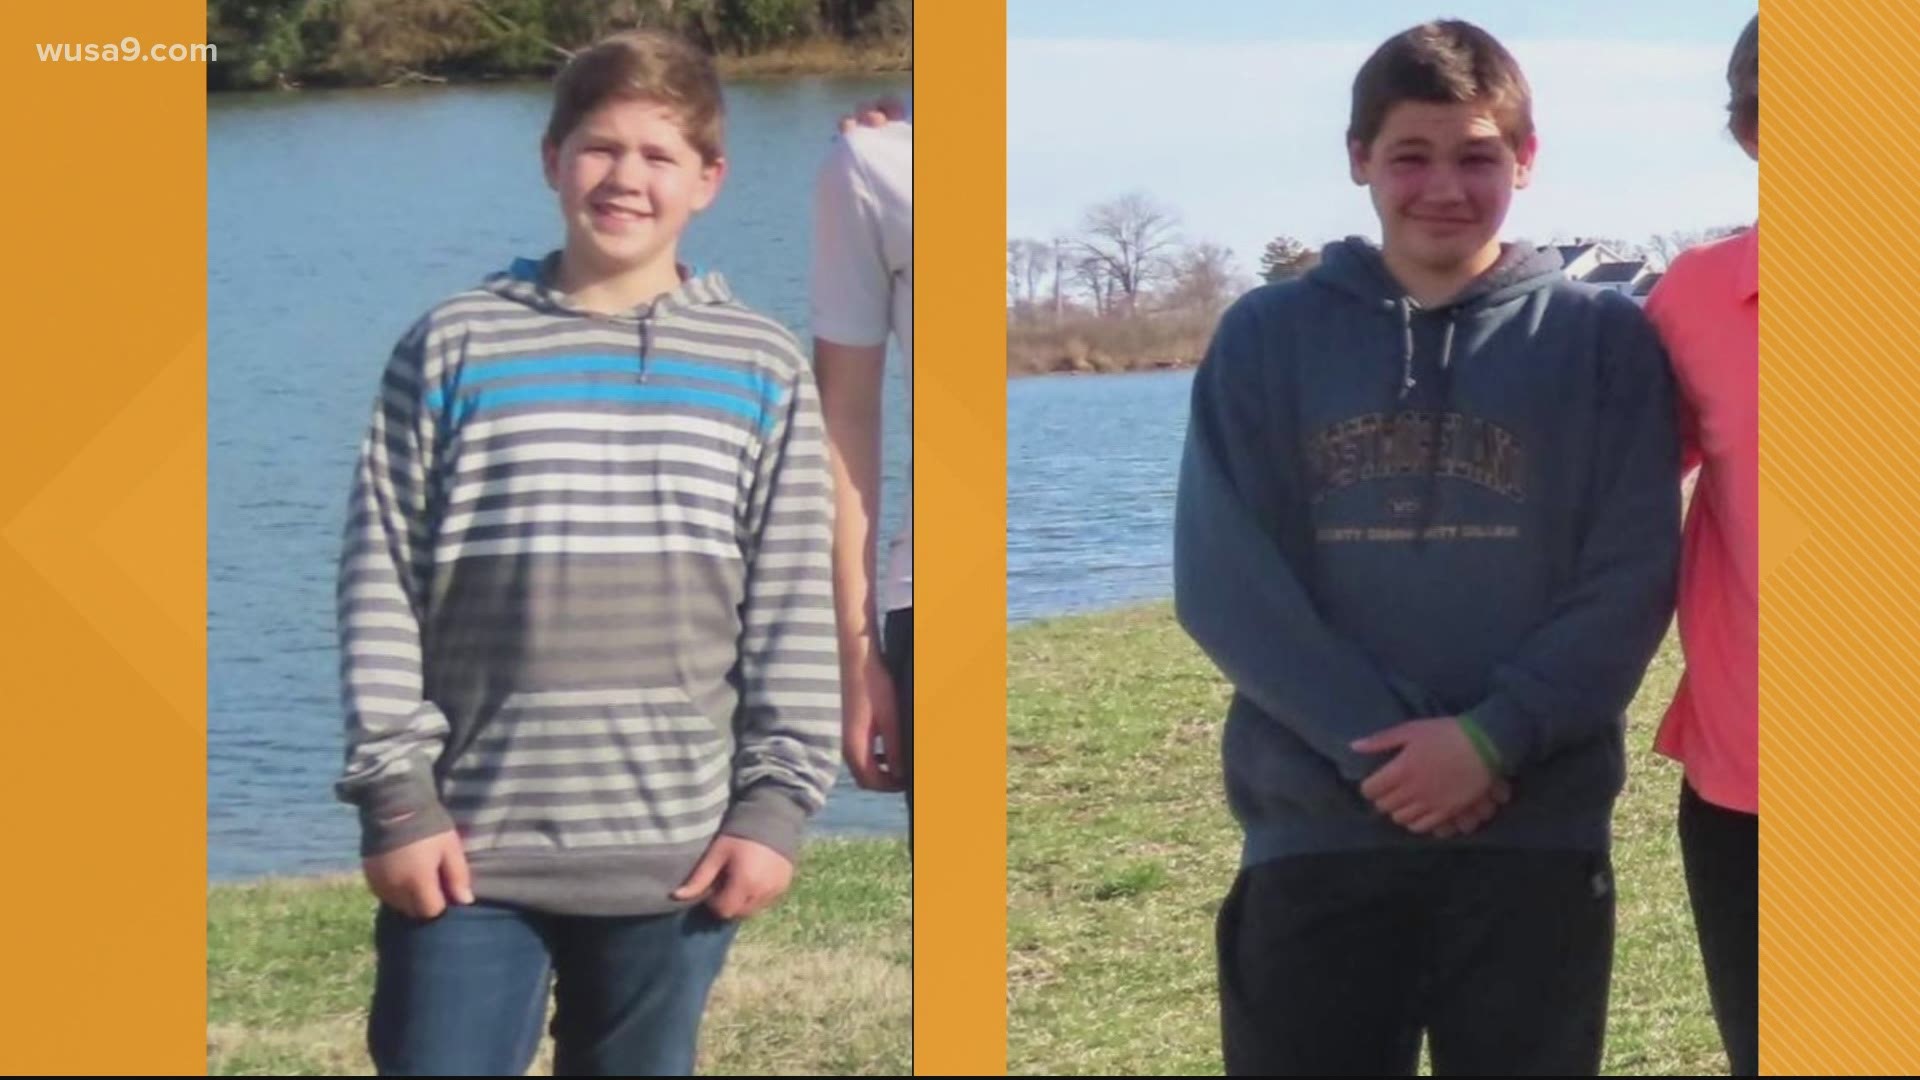 The St. Mary’s County Sheriff’s Office is leading the search for 13-year-old Jesse Oleg Clark and his 15-year-old brother, Josiah Vladimir Clark, last seen Sunday.